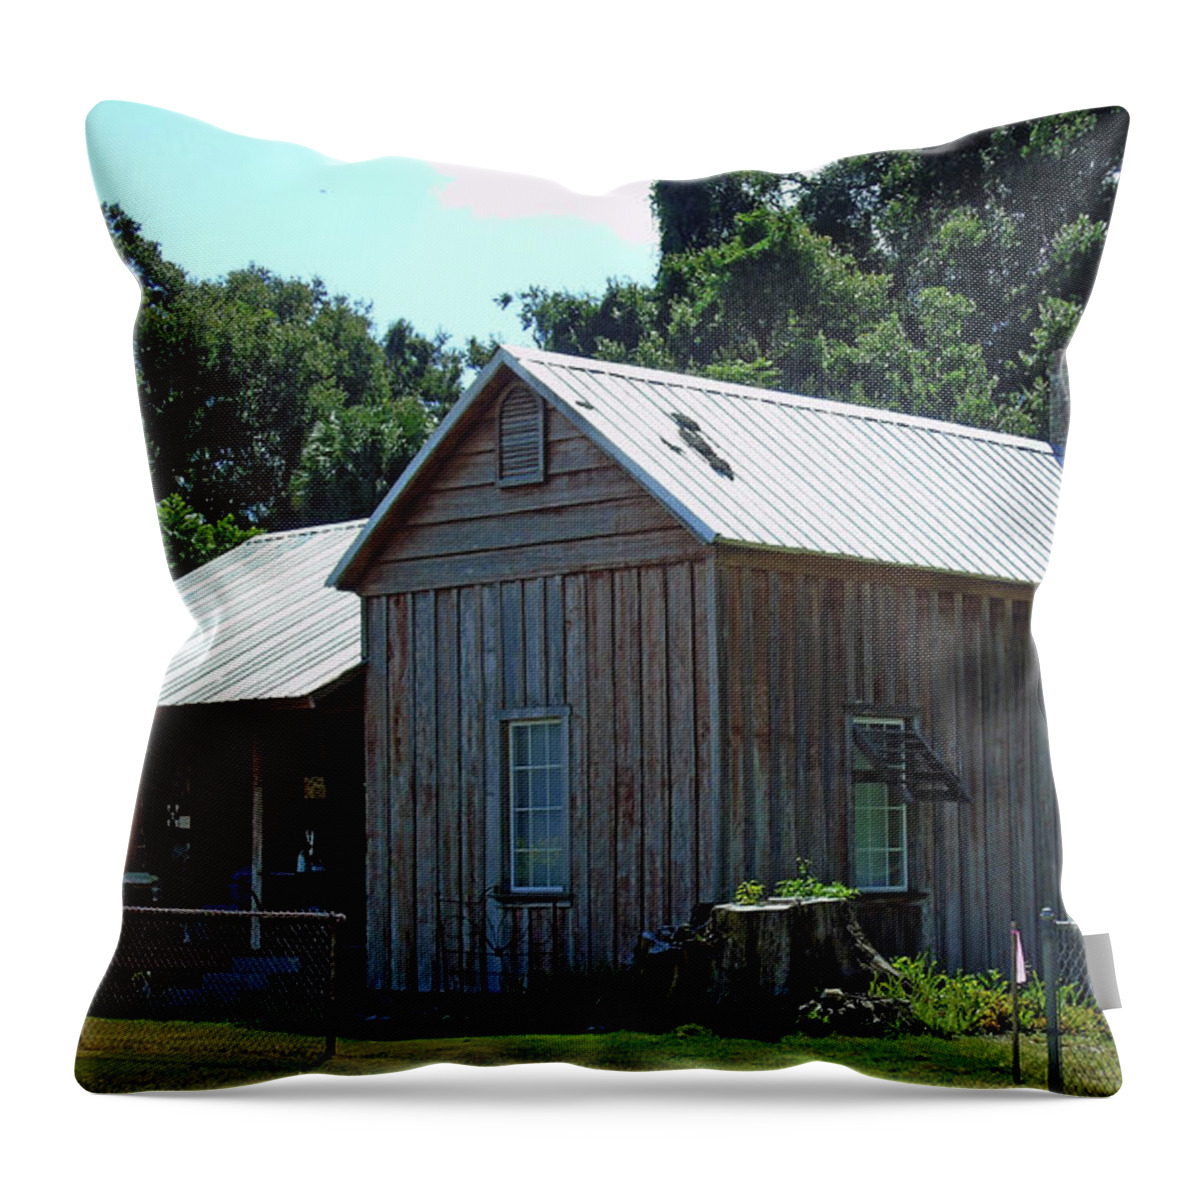 Home Throw Pillow featuring the photograph Old Brown Florida Home by D Hackett